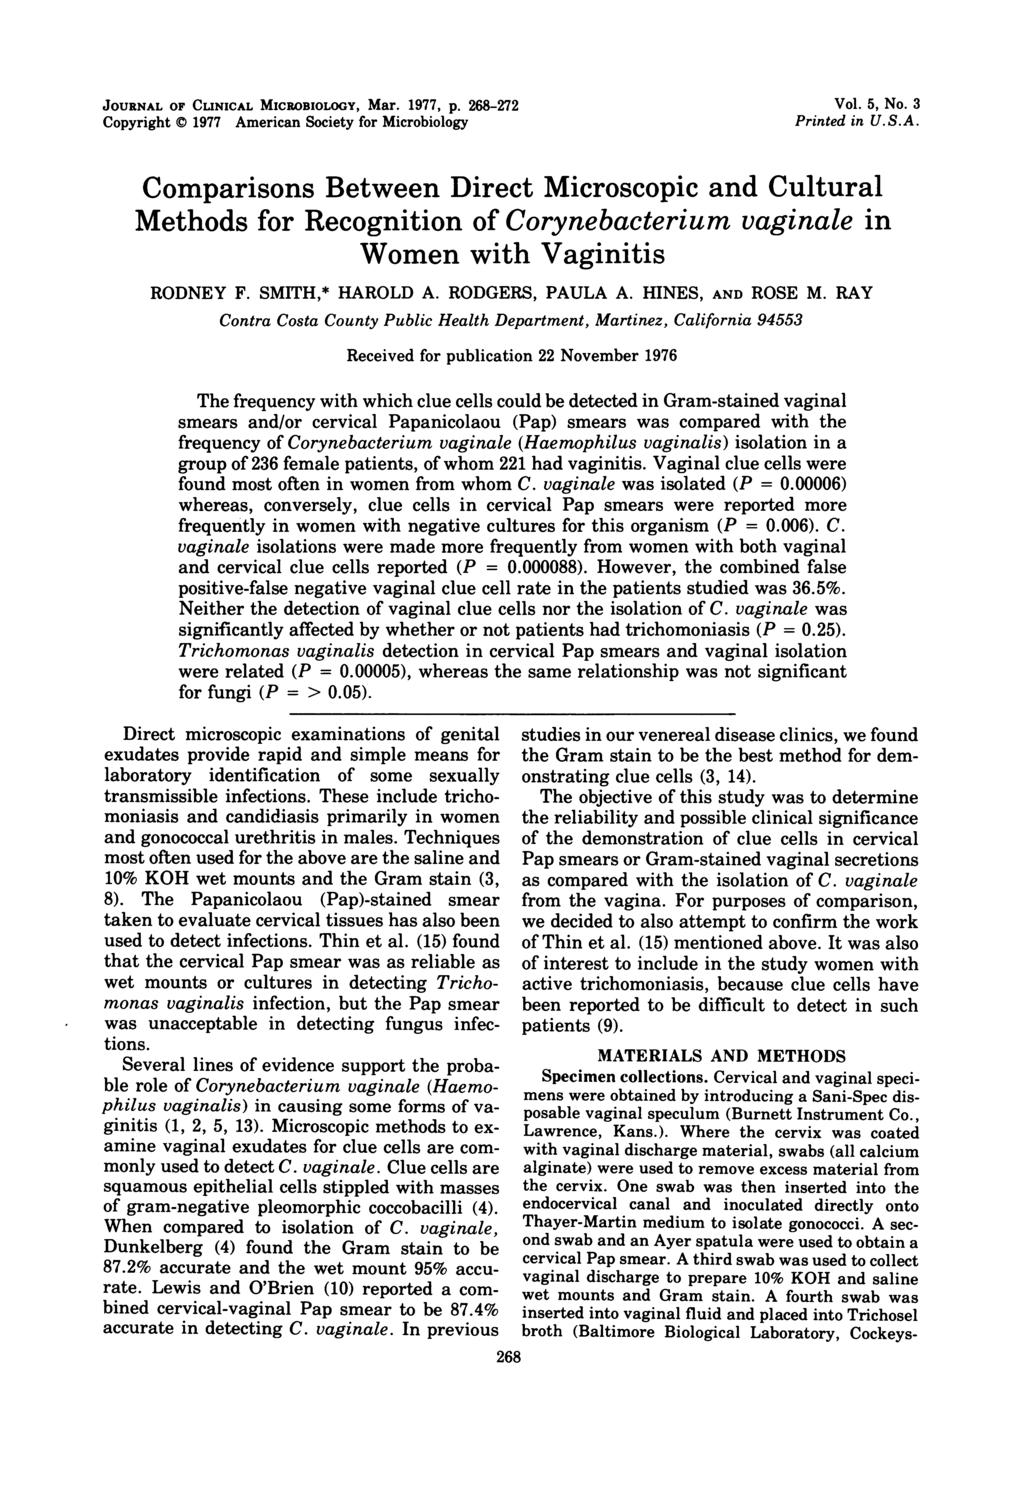 JOURNAL OF CLINICAL MICROBIOLOGY, Mar. 1977, p. 268-272 Copyright 1977 American Society for Microbiology Vol. 5, No. 3 Printed in U.S.A. Comparisons Between Direct Microscopic and Cultural Methods for Recognition of Corynebacterium vaginale in Women with Vaginitis RODNEY F.